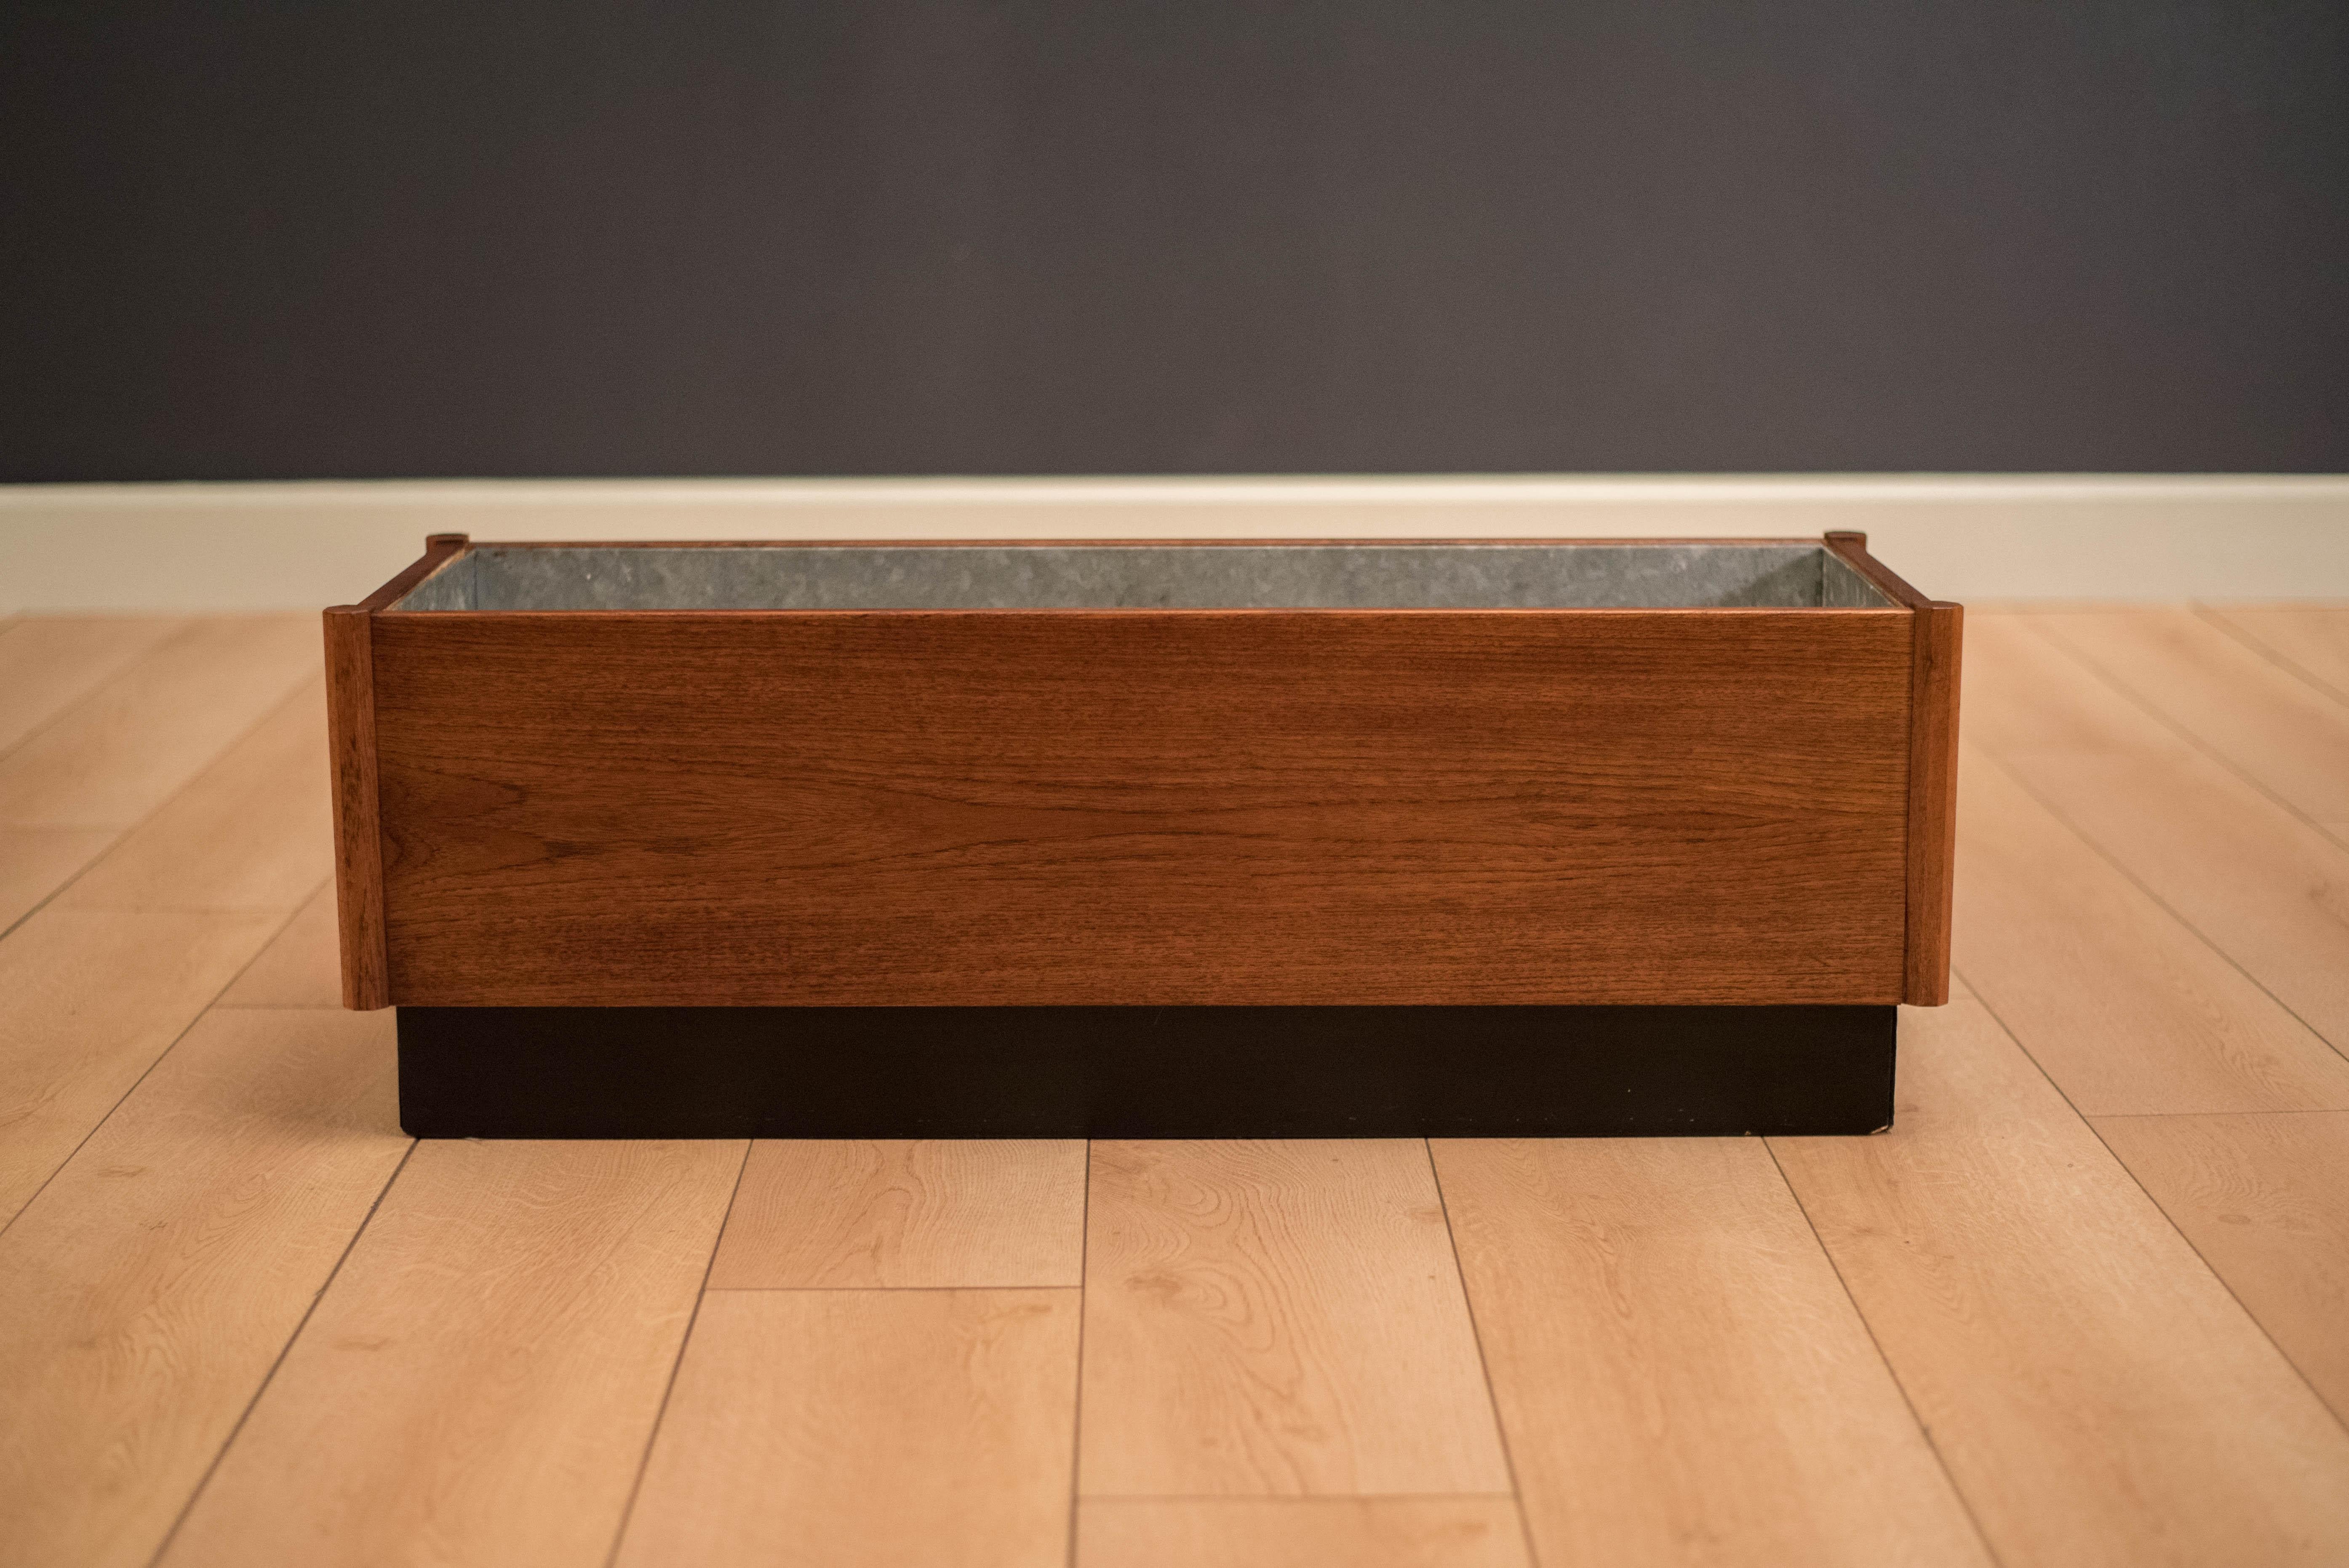 Vintage rectangular planter box in teak with black plinth base. This decorative piece includes a removable galvanized insert tray and is recommended for indoor use. 

Interior tray: 33.5